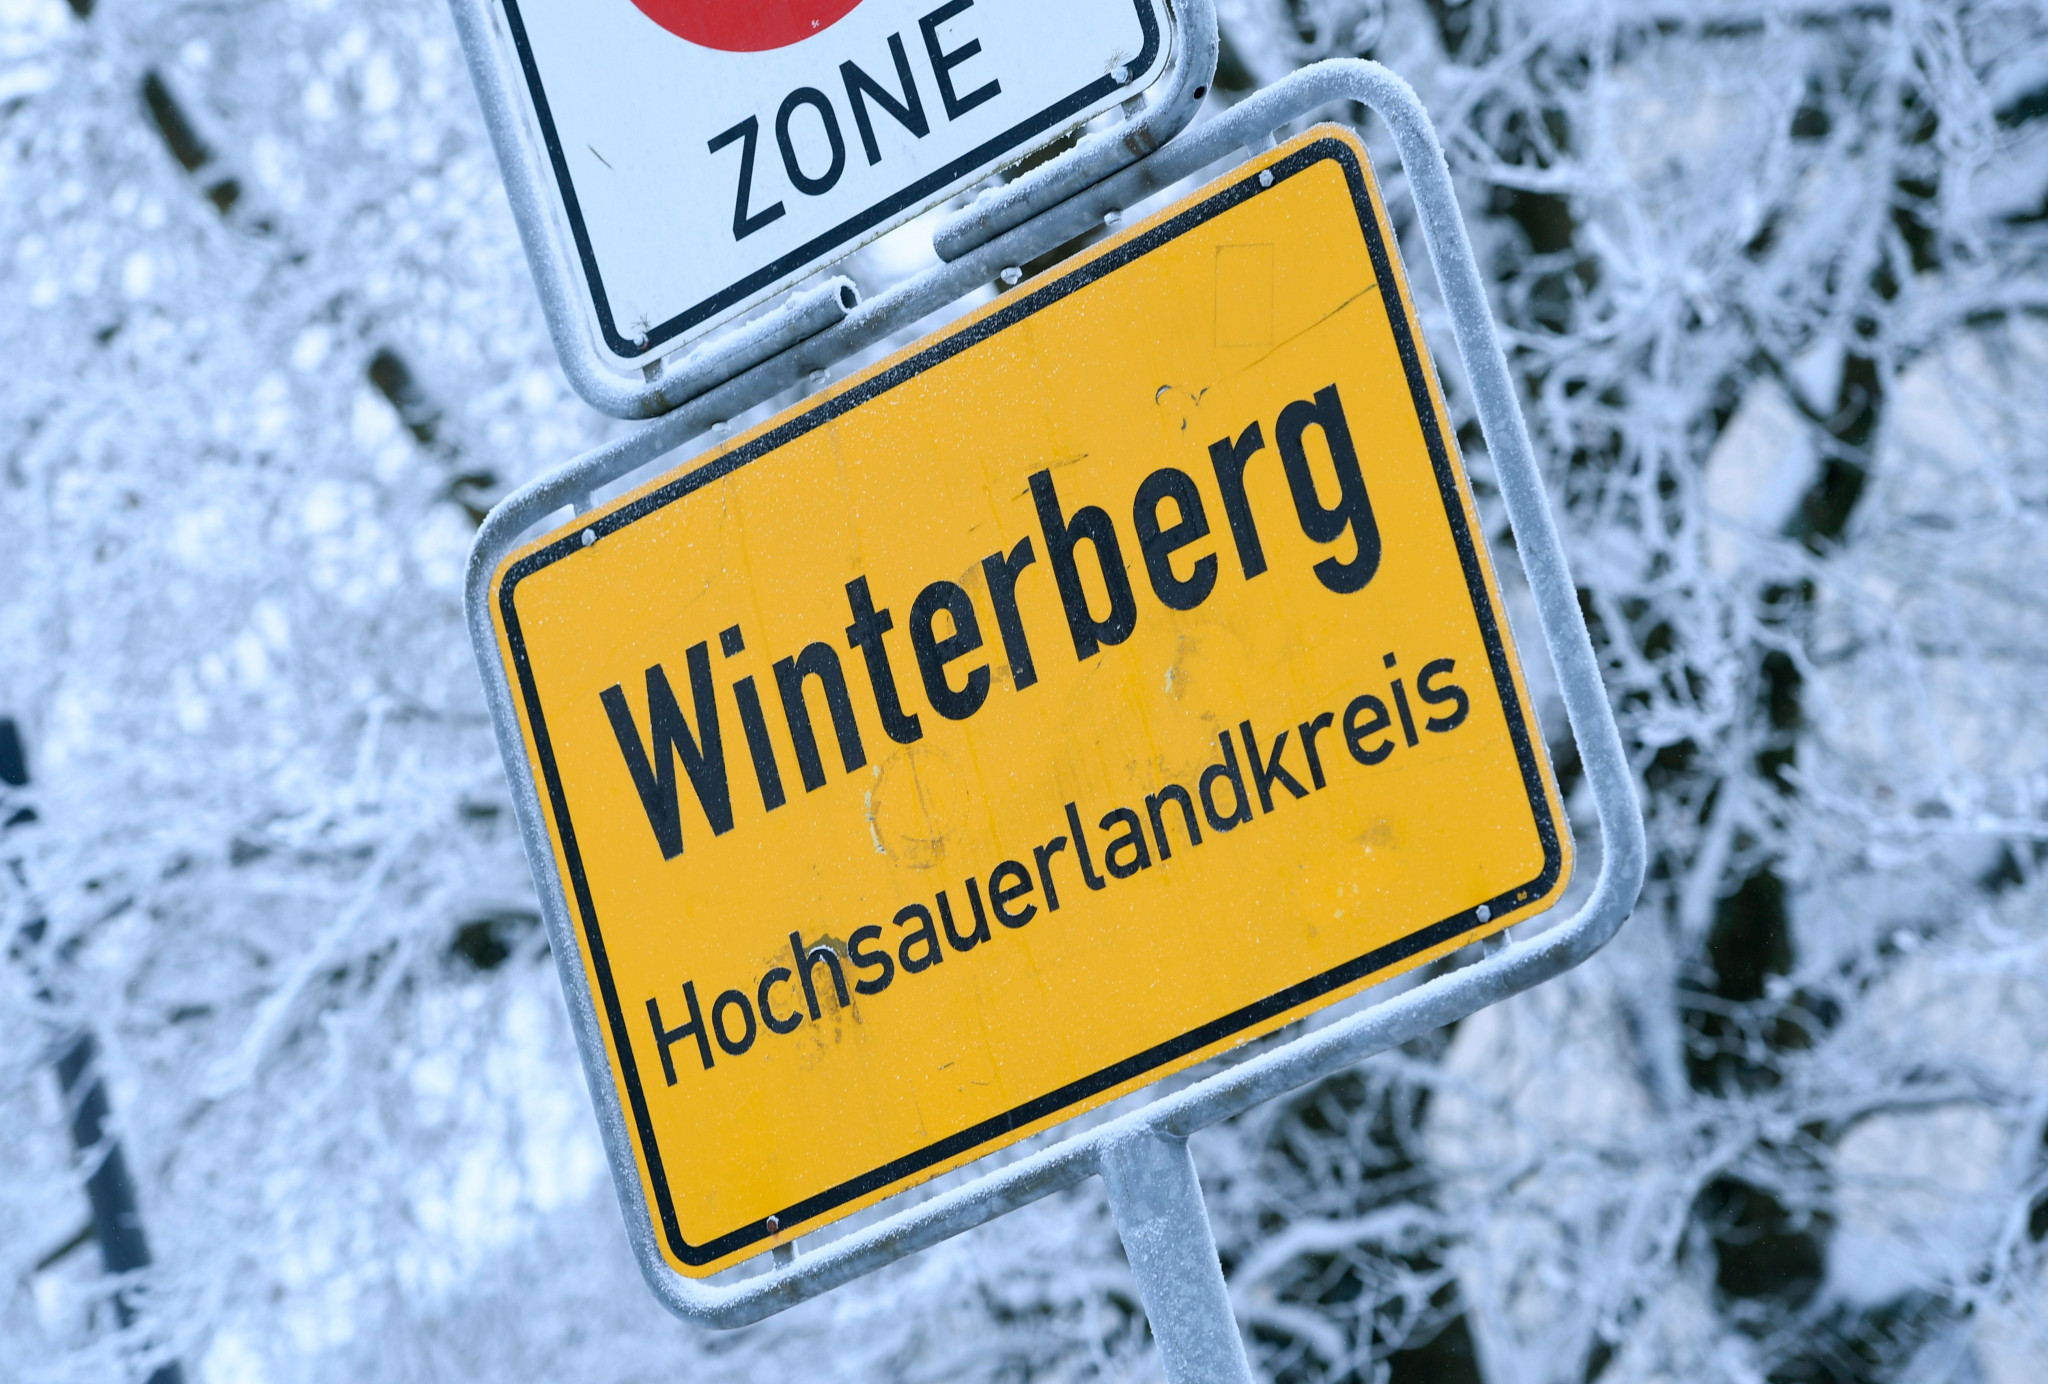 Winterberg is the host for this year's FIL Junior World Championships ©Getty Images